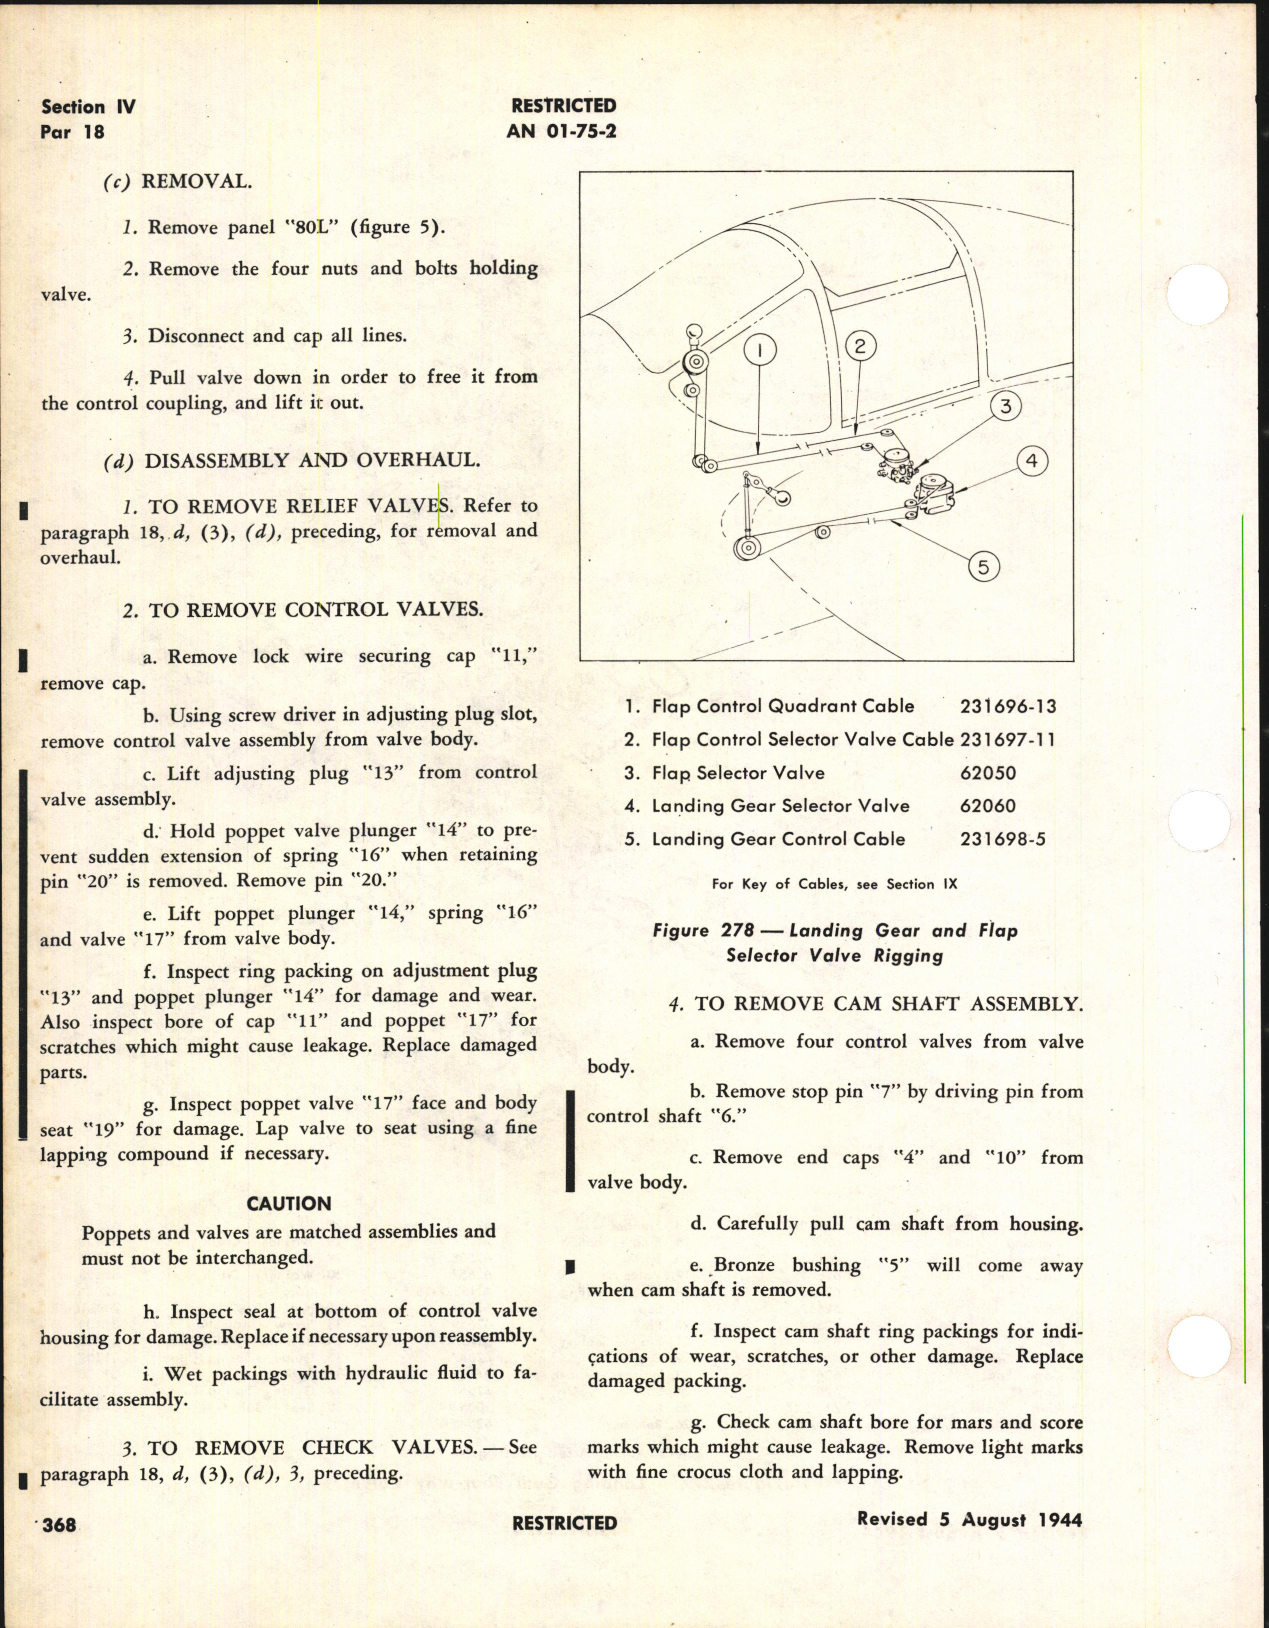 Sample page 6 from AirCorps Library document: Maintenance Manual for P-38